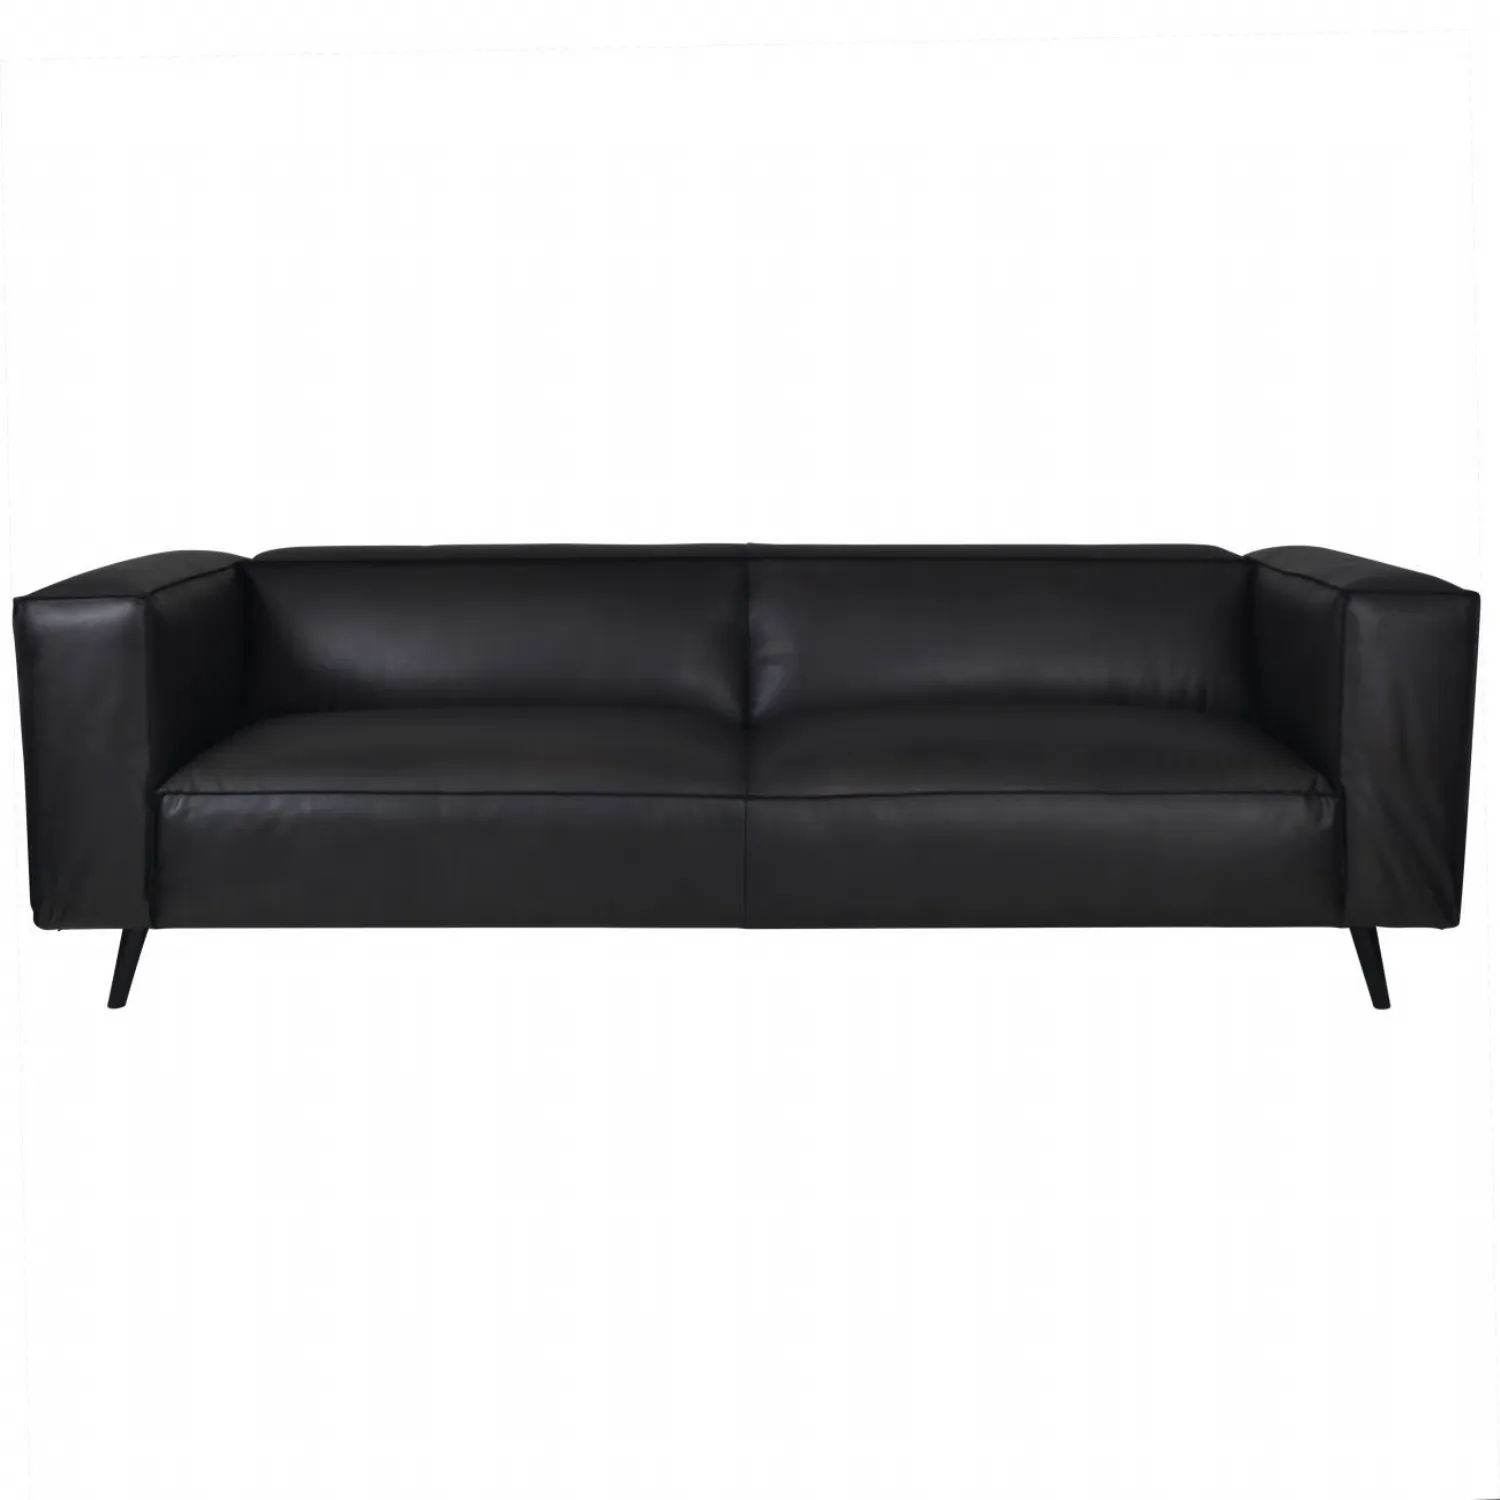 Black Large Leather 4 Seater Sofa 240cm Wide